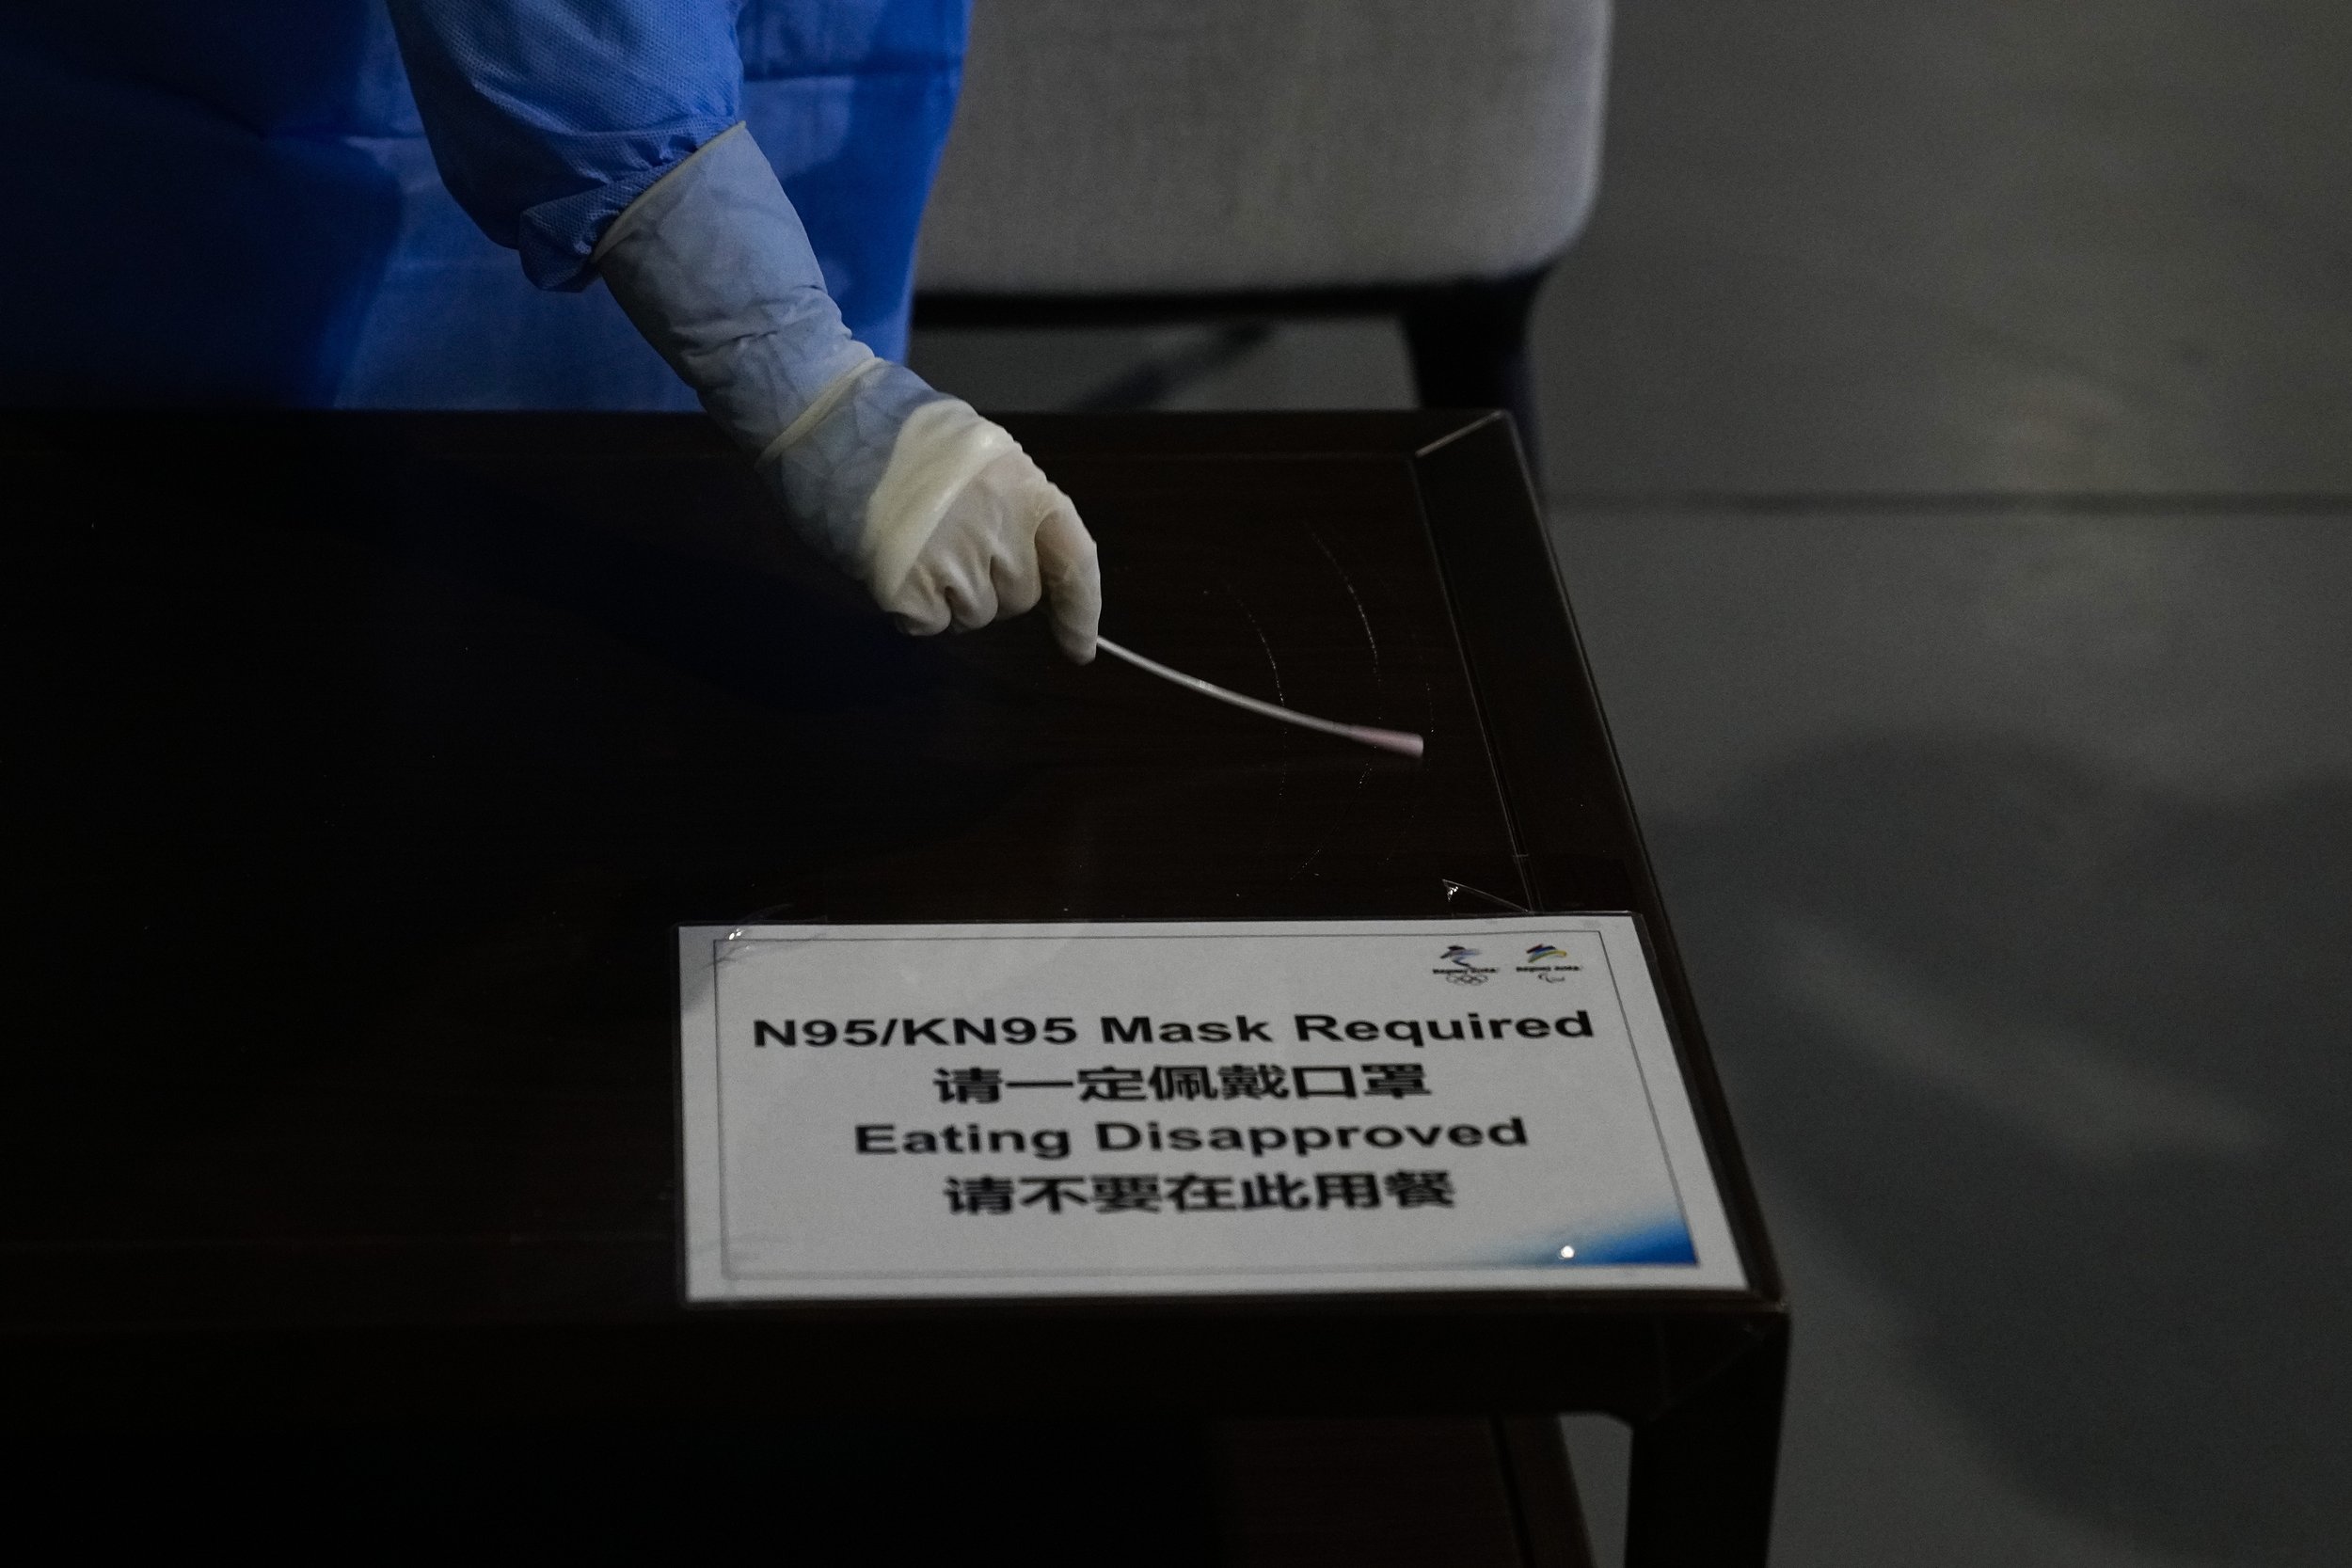  A medical worker collects a sample from a table to test for COVID-19 in the main media center at the 2022 Winter Olympics, Friday, Feb. 11, 2022, in Beijing. (AP Photo/Jae C. Hong) 